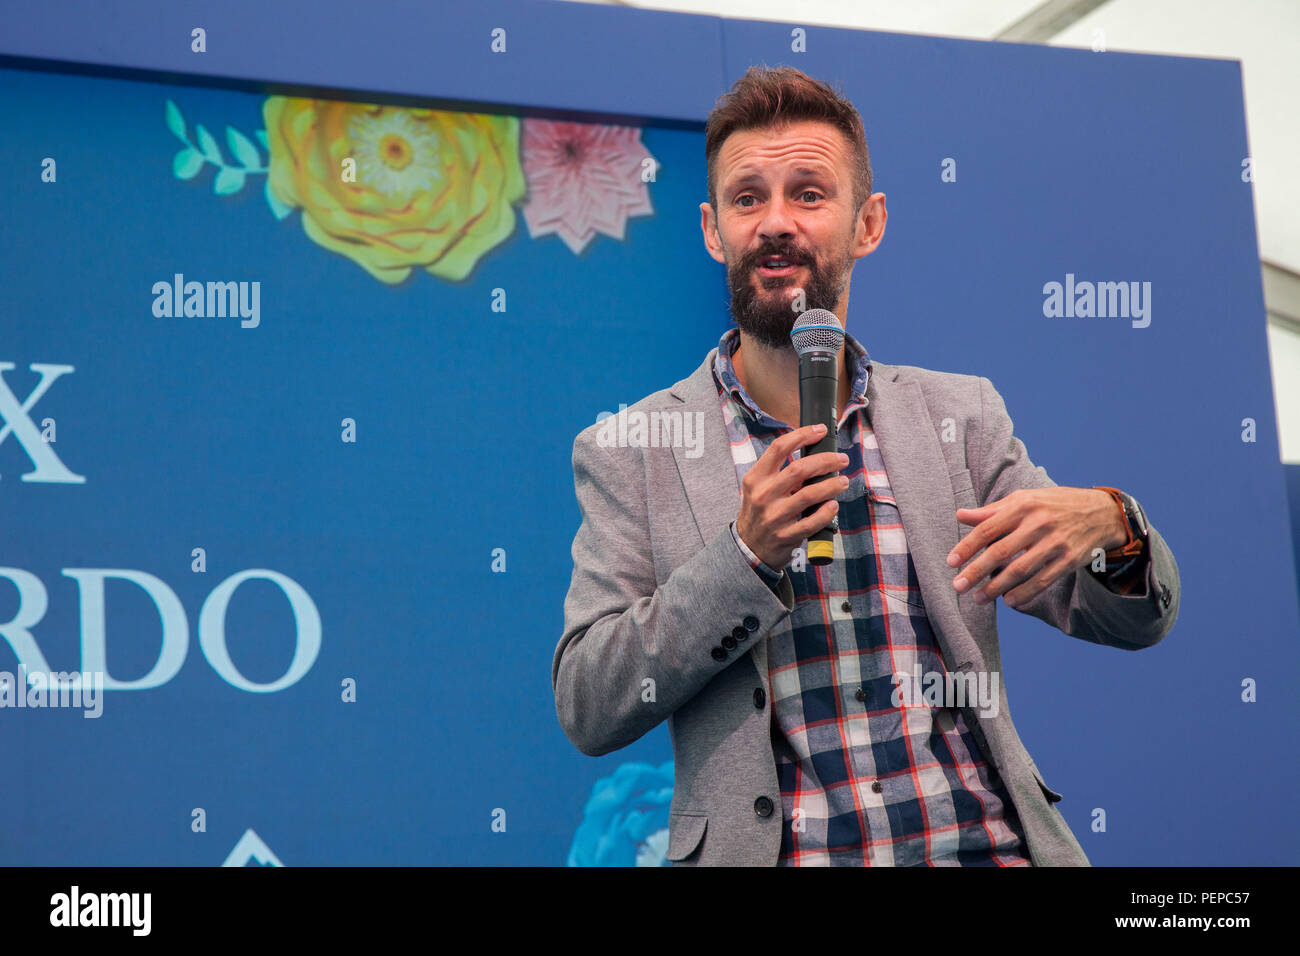 Southport, Merseyside, UK. 17th Aug, 2018. Max McMurdo, British designer, upcycler, upcycle junk, entrepreneur and TV presenter talking in the celebrity theatre at Southport Flower Show, as exhibitors, garden designers, and floral artists wow the visitors to this famous annual event. Credit: MediaWorldImages/Alamy Live News Stock Photo